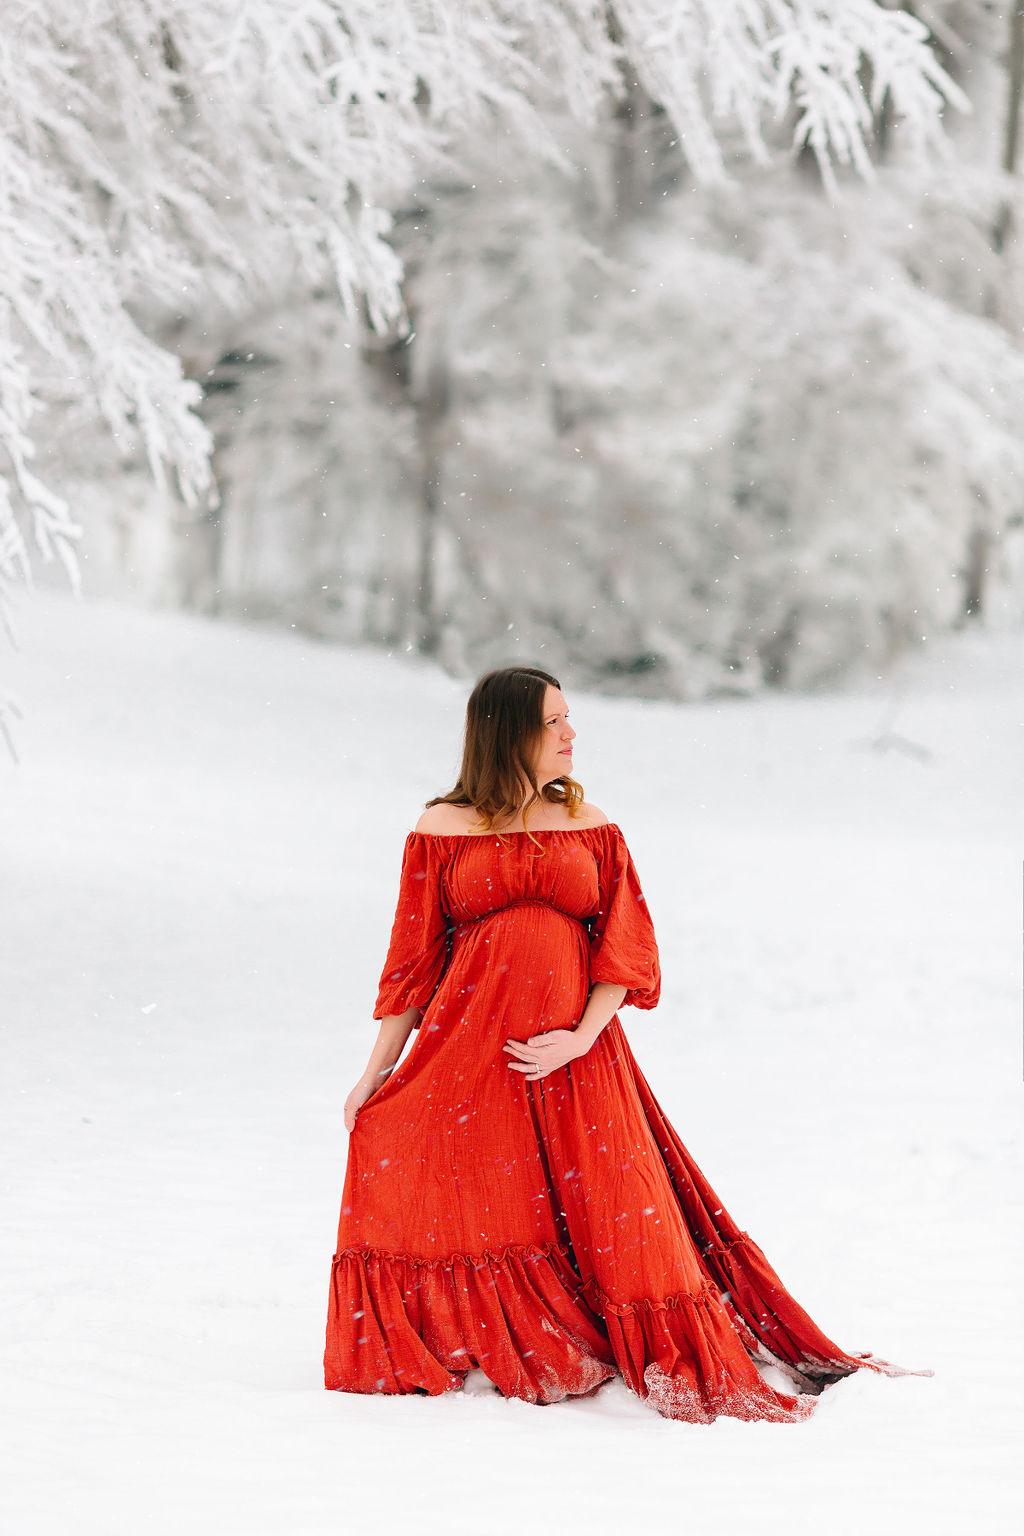 A mother to be stands out in fresh snow in a red maternity gown premier birth center